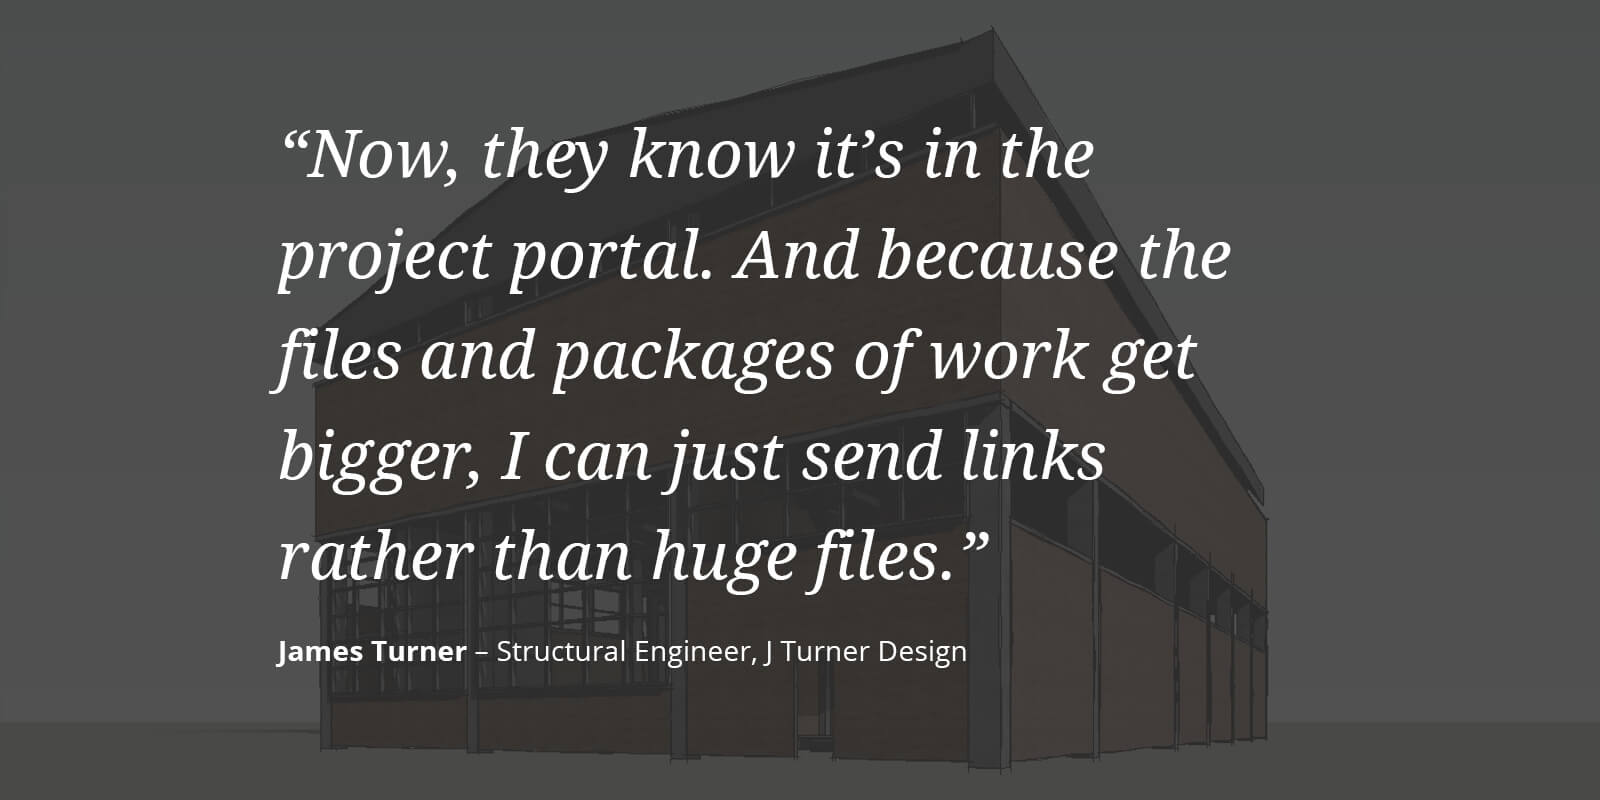 James Turner, director of J Turner Design, uses technology to punch above his weight.